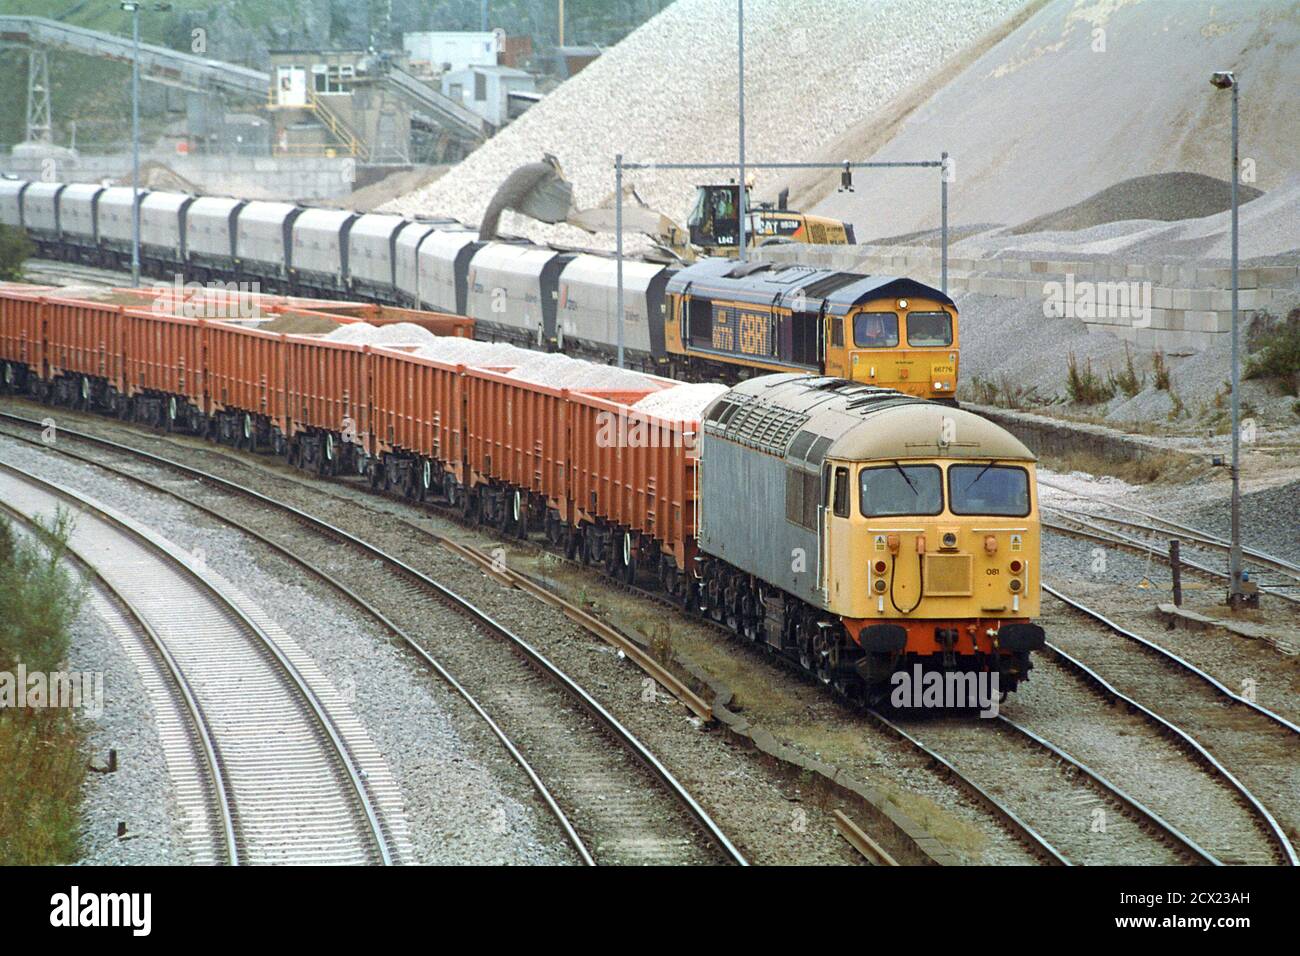 Peak Dale, Buxton, UK - 16 September 2020: The freight trains with the diesel locomotives at Peak Dale yard for stone traffic from the quarry. Stock Photo